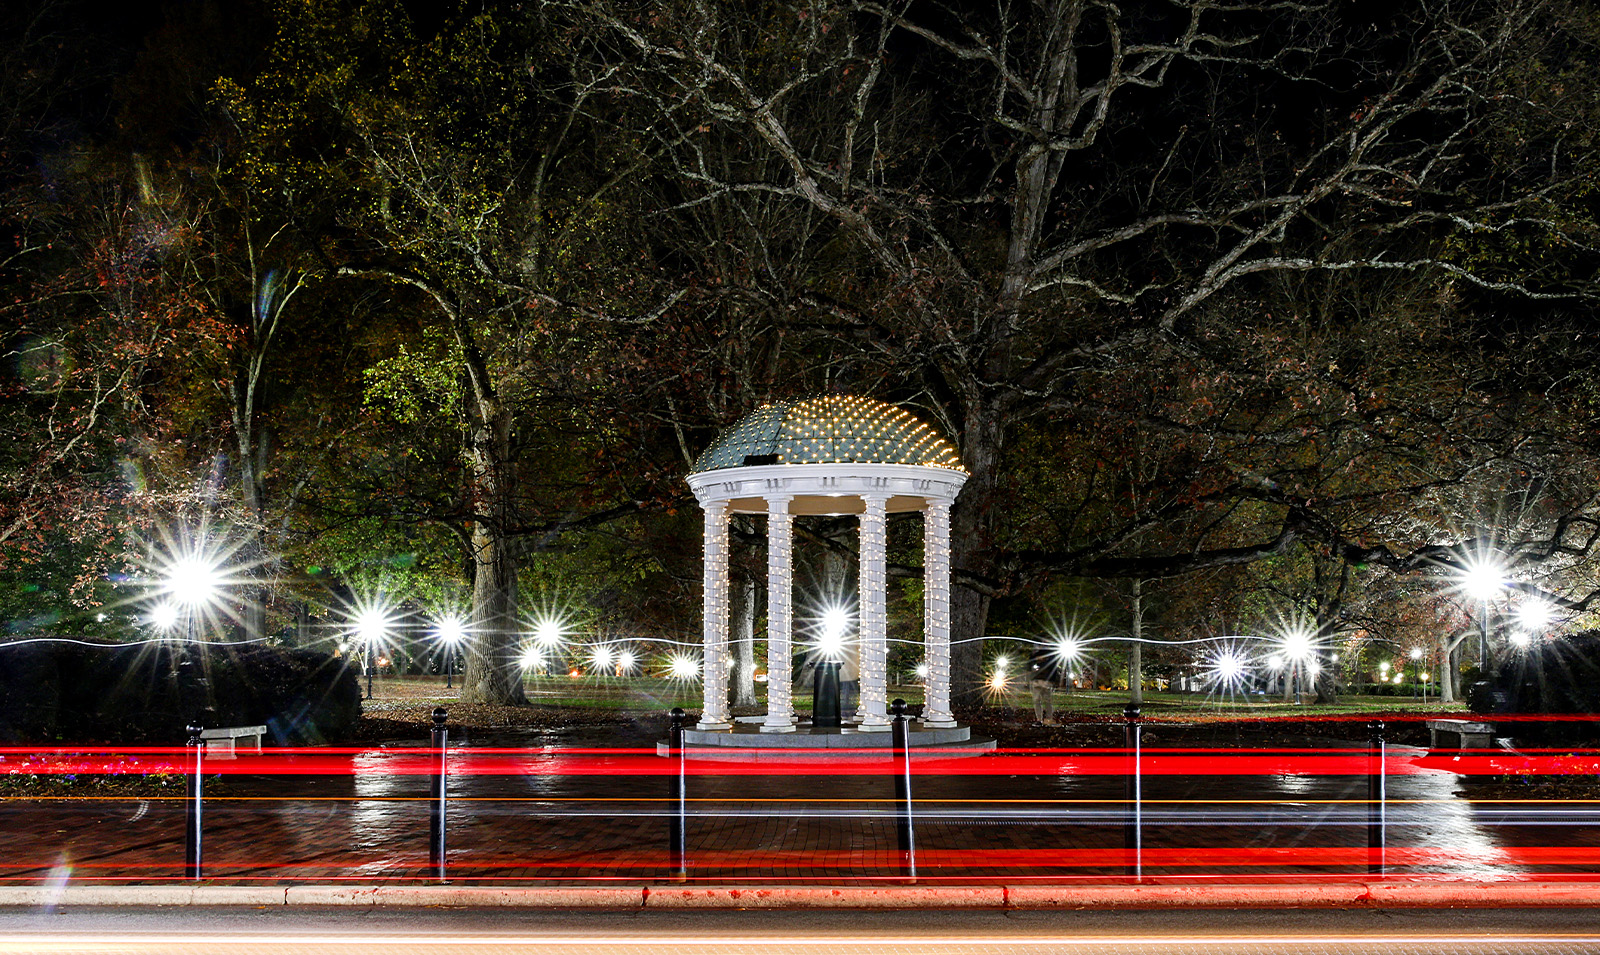 Nightime view of the Old Well on the campus of UNC-Chapel Hill. Long-exposure car lights of passing-by cars on Cameron Avenue are seen in the foreground, and trees and lights from McCorkle Place are seen behind the well.